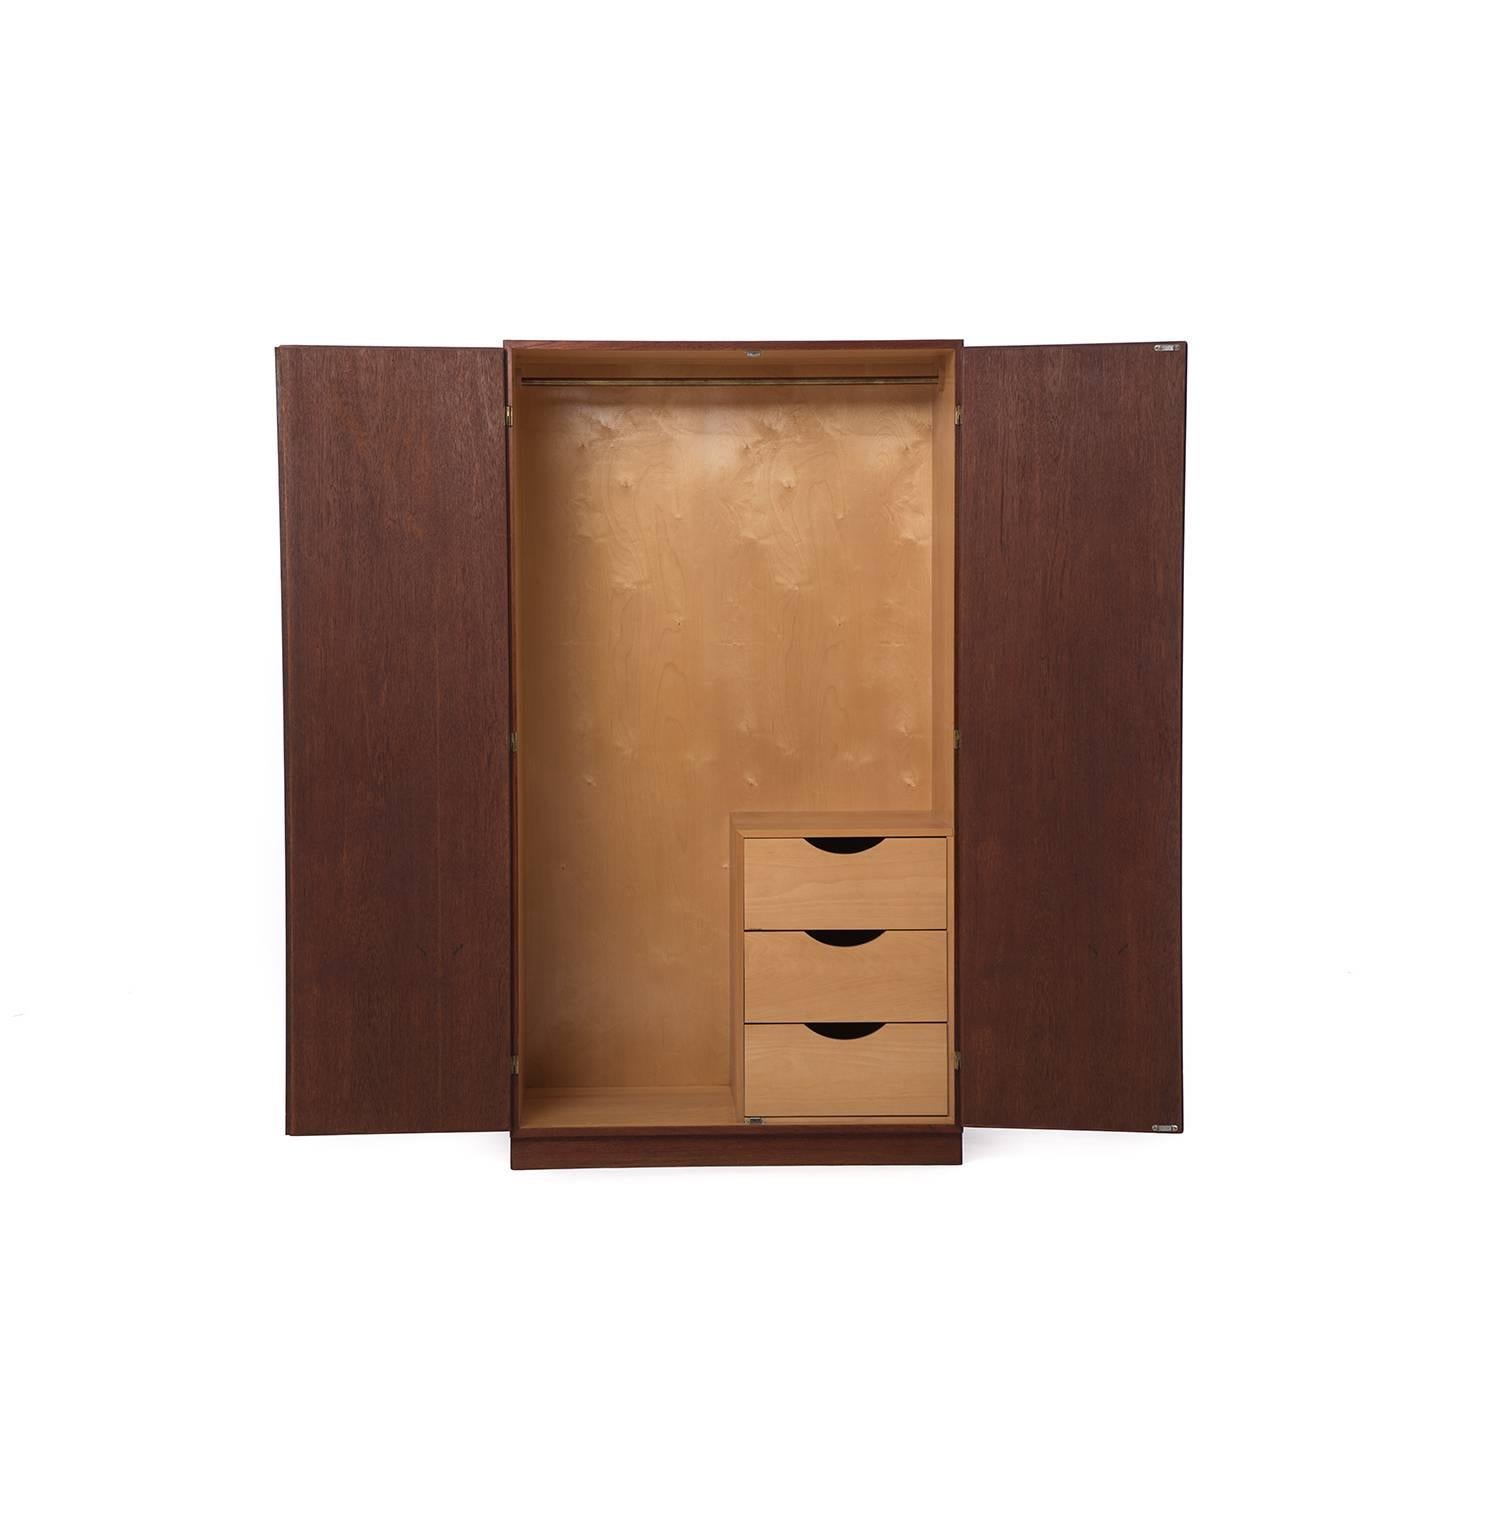 This Børge Mogensen wardrobe features an oiled teak exterior and a lacquered European beech wood interior. Hanger bar and three drawers with ledge provide storage and organization.